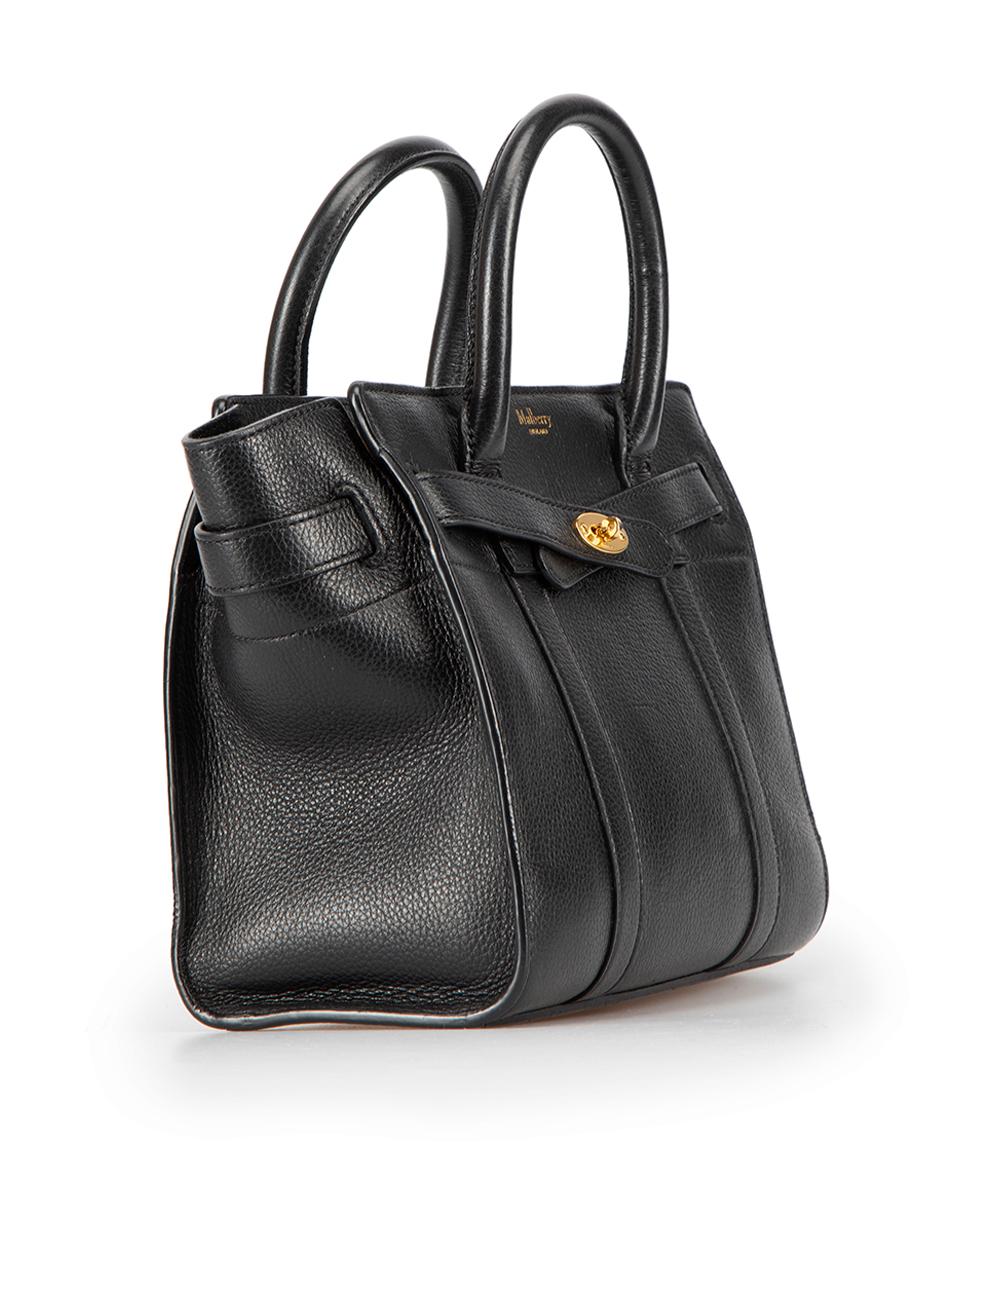 CONDITION is Very good. Minimal wear to bag is evident. Minimal wear to the shoulder strap base loops with loosening of the stitching and the zip handle has come undone on this used Mulberry designer resale item.



Details


Black

Leather

Small